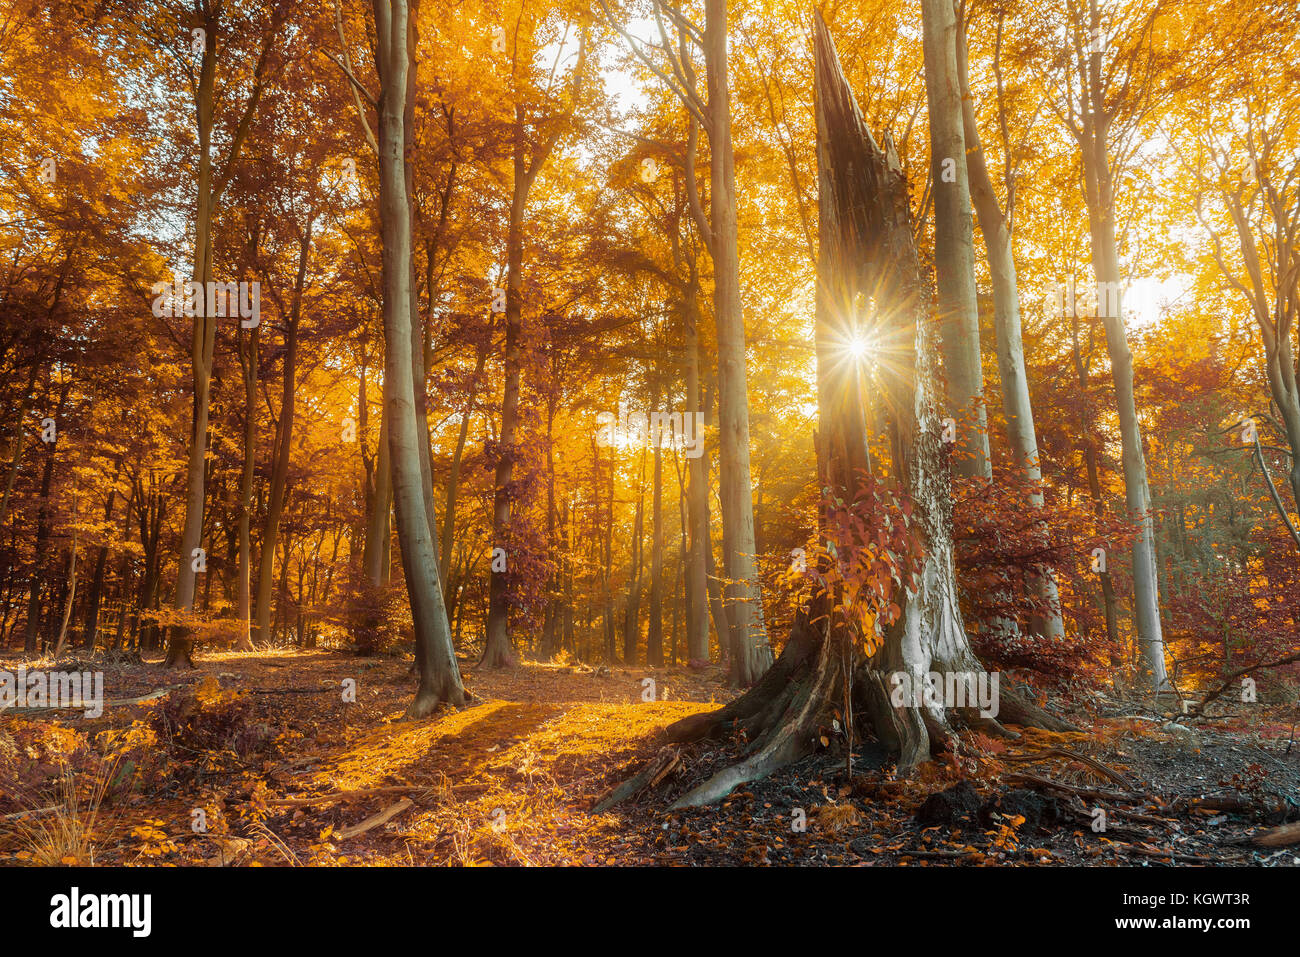 The sun peaking trough a tree hole in autumn. Stock Photo